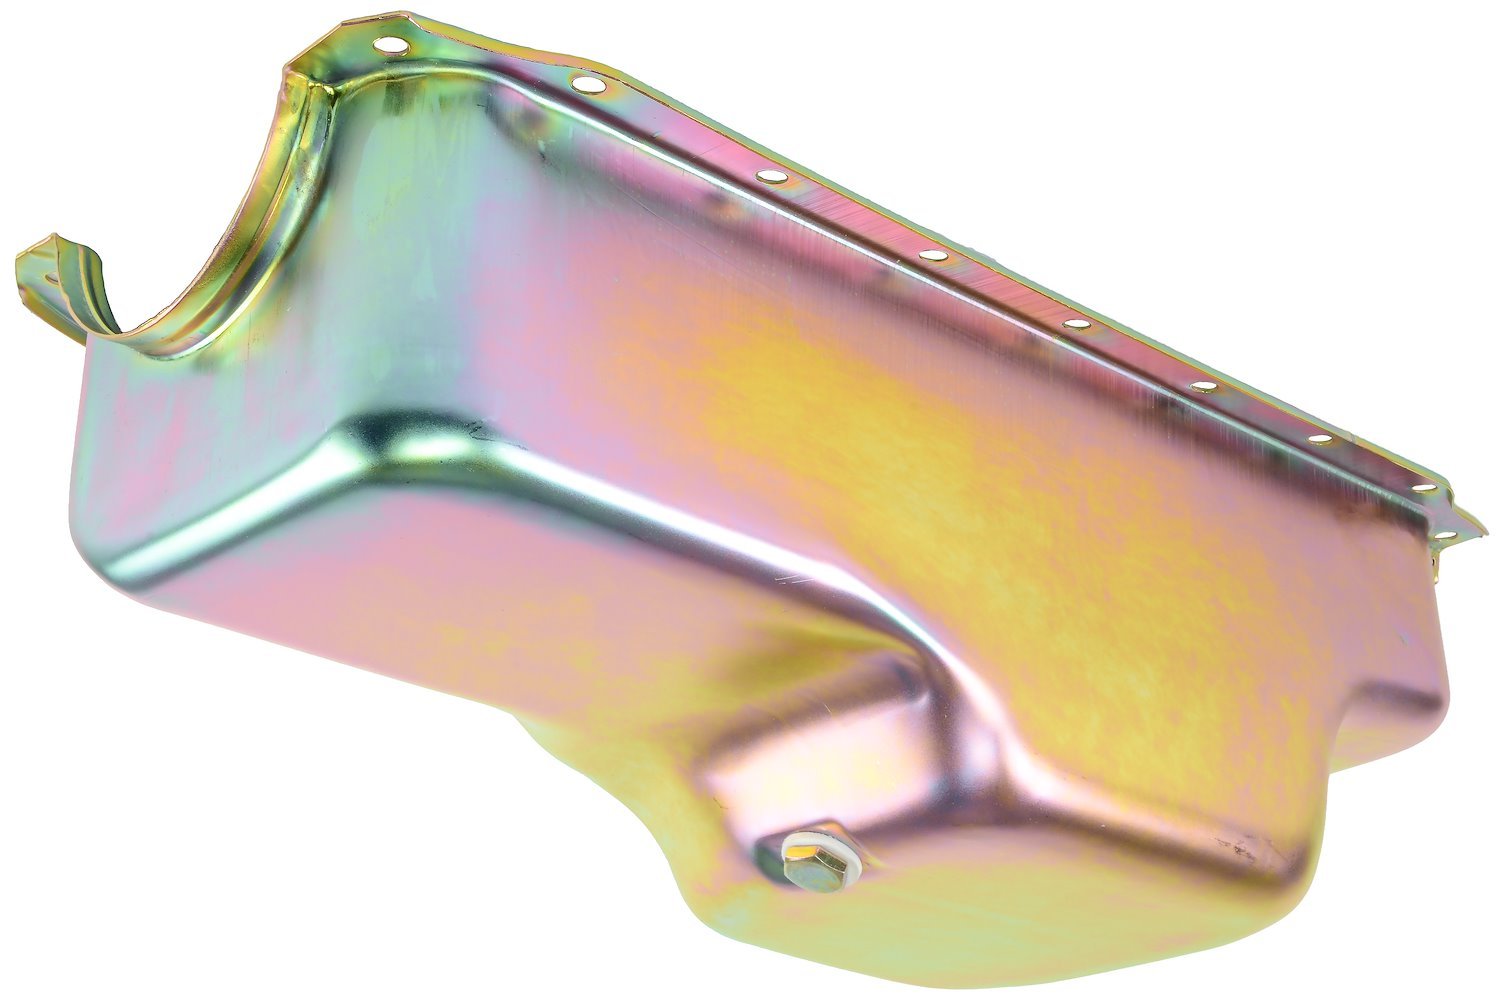 Stock-Style Replacement Oil Pan for 1972-1989 Small Block